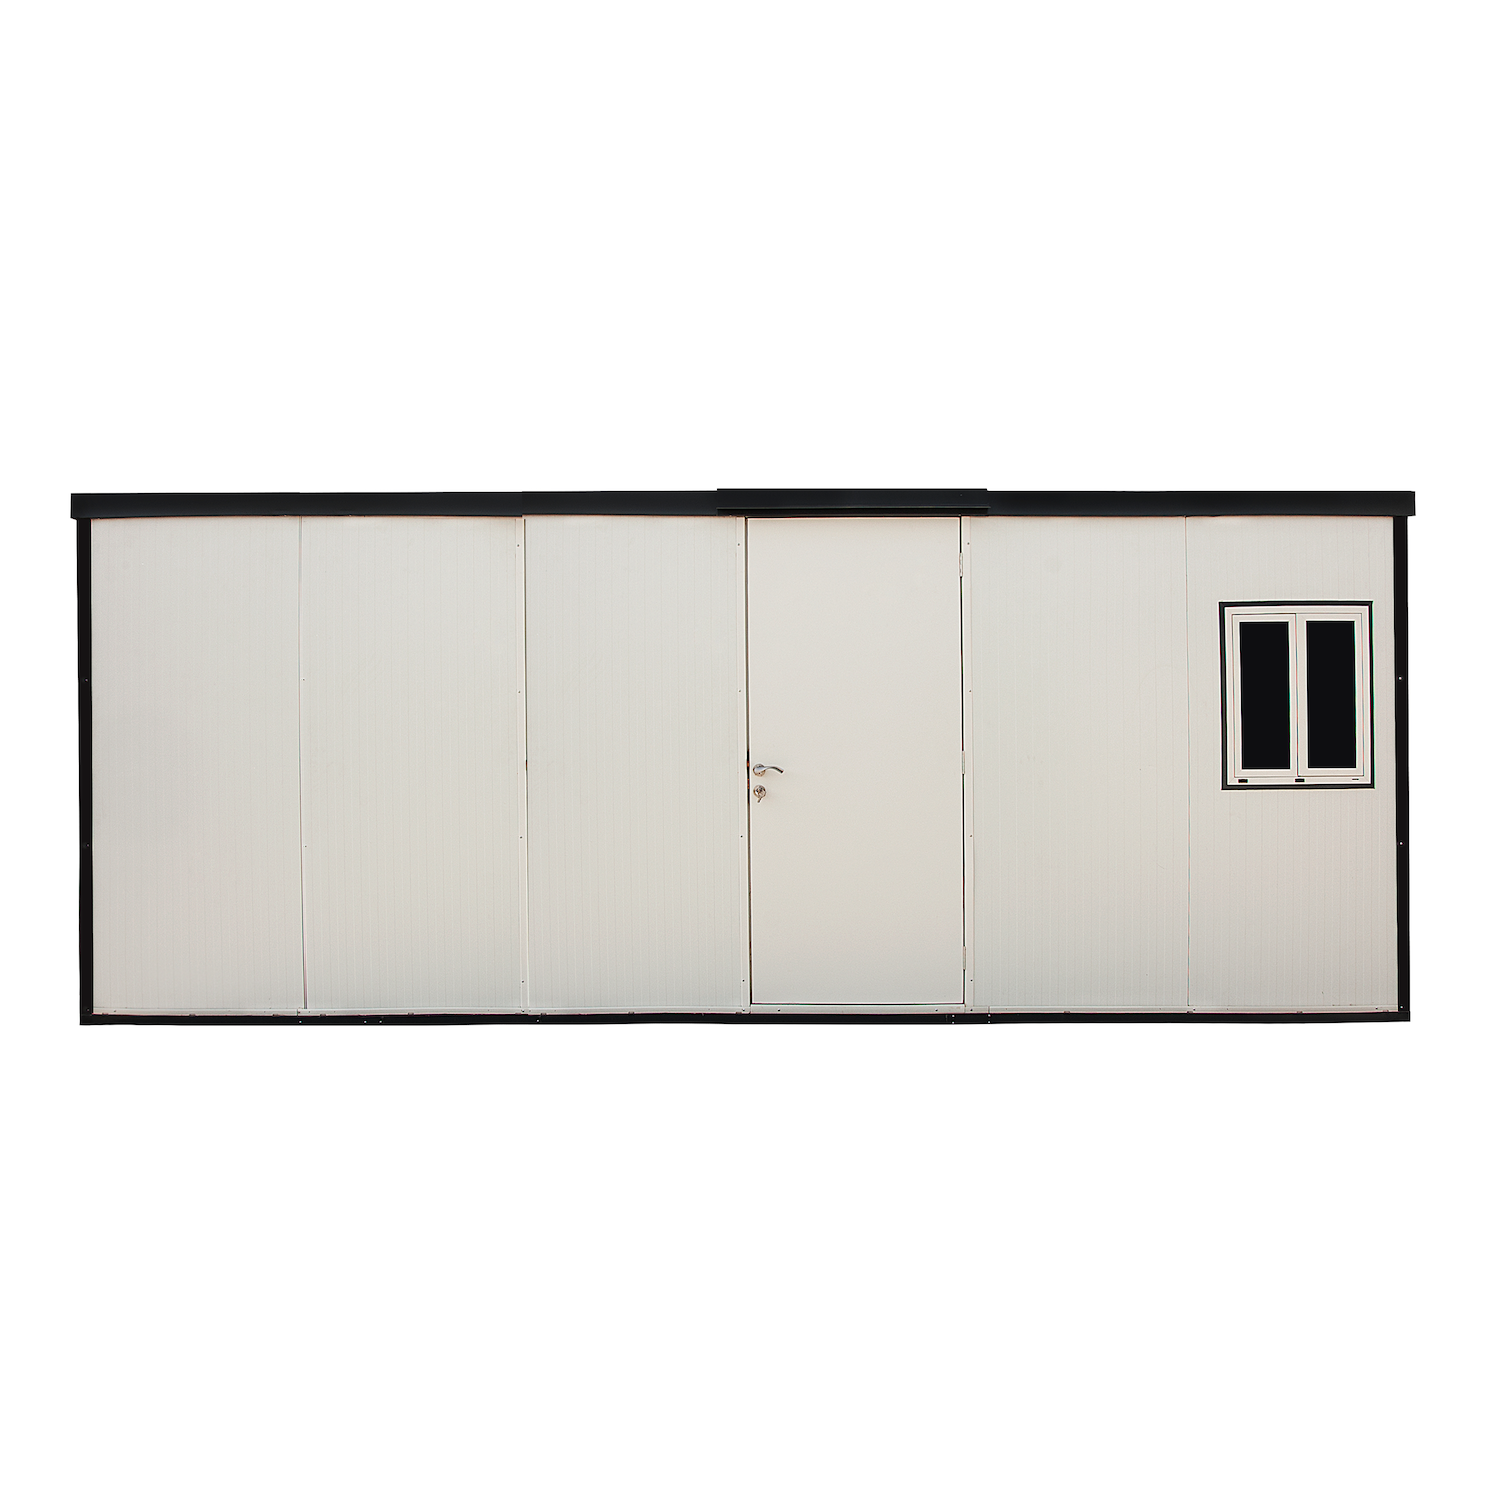 Duramax Insulated Buildings Flat Top Insulated Buildings 19 ft. W x 10 ft. D